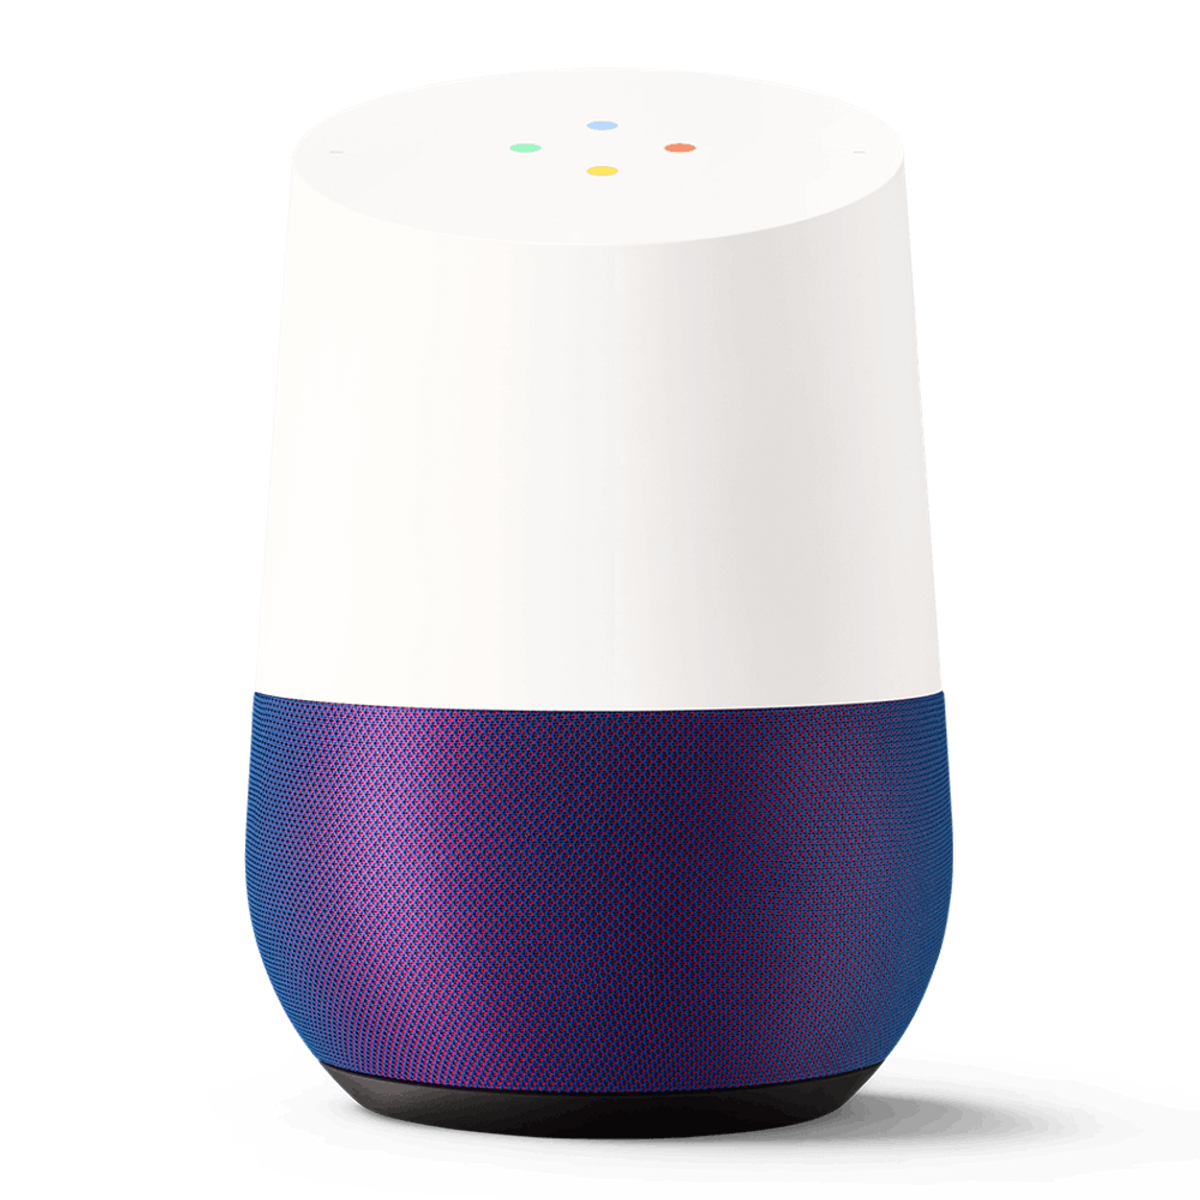 Your Google Home Will Now Respond to Just You